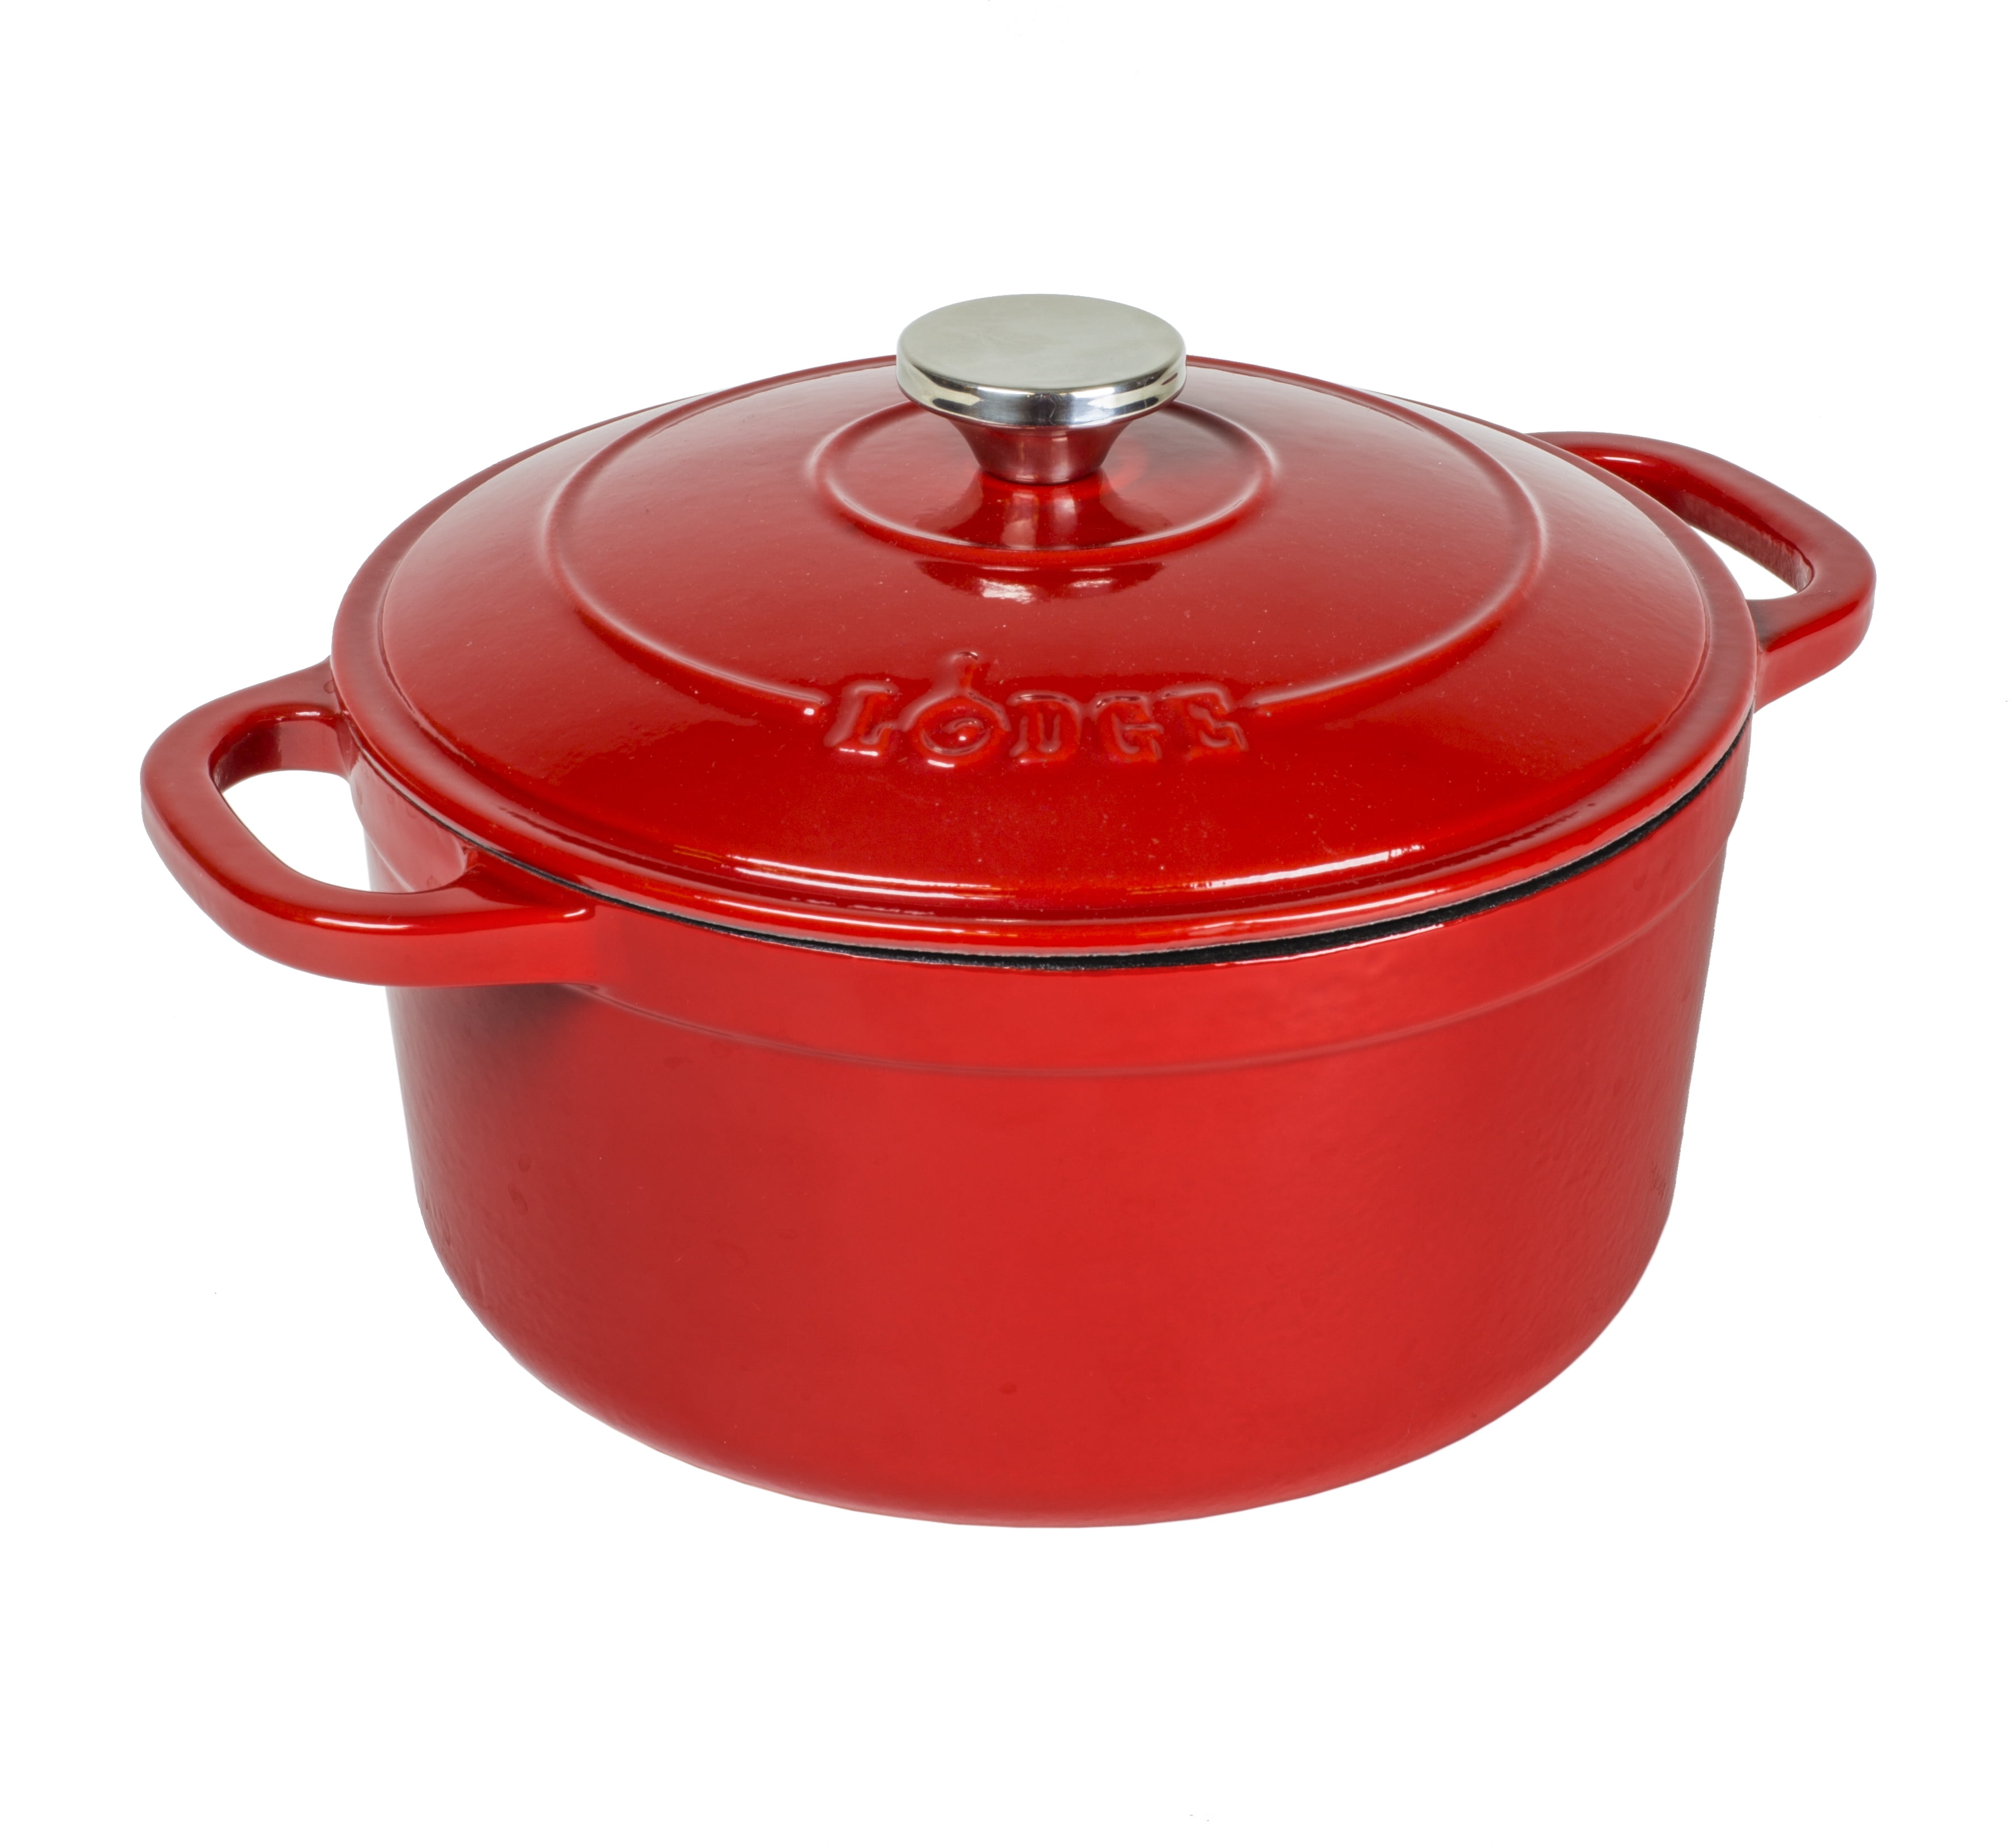 Lodge Cast Iron Dutch Oven - Red, 6 qt - Fred Meyer